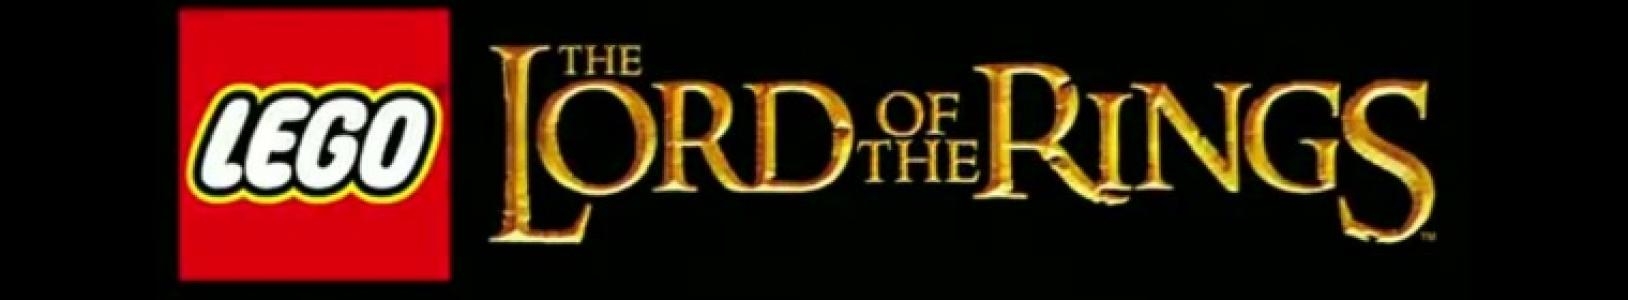 LEGO The Lord of the Rings banner